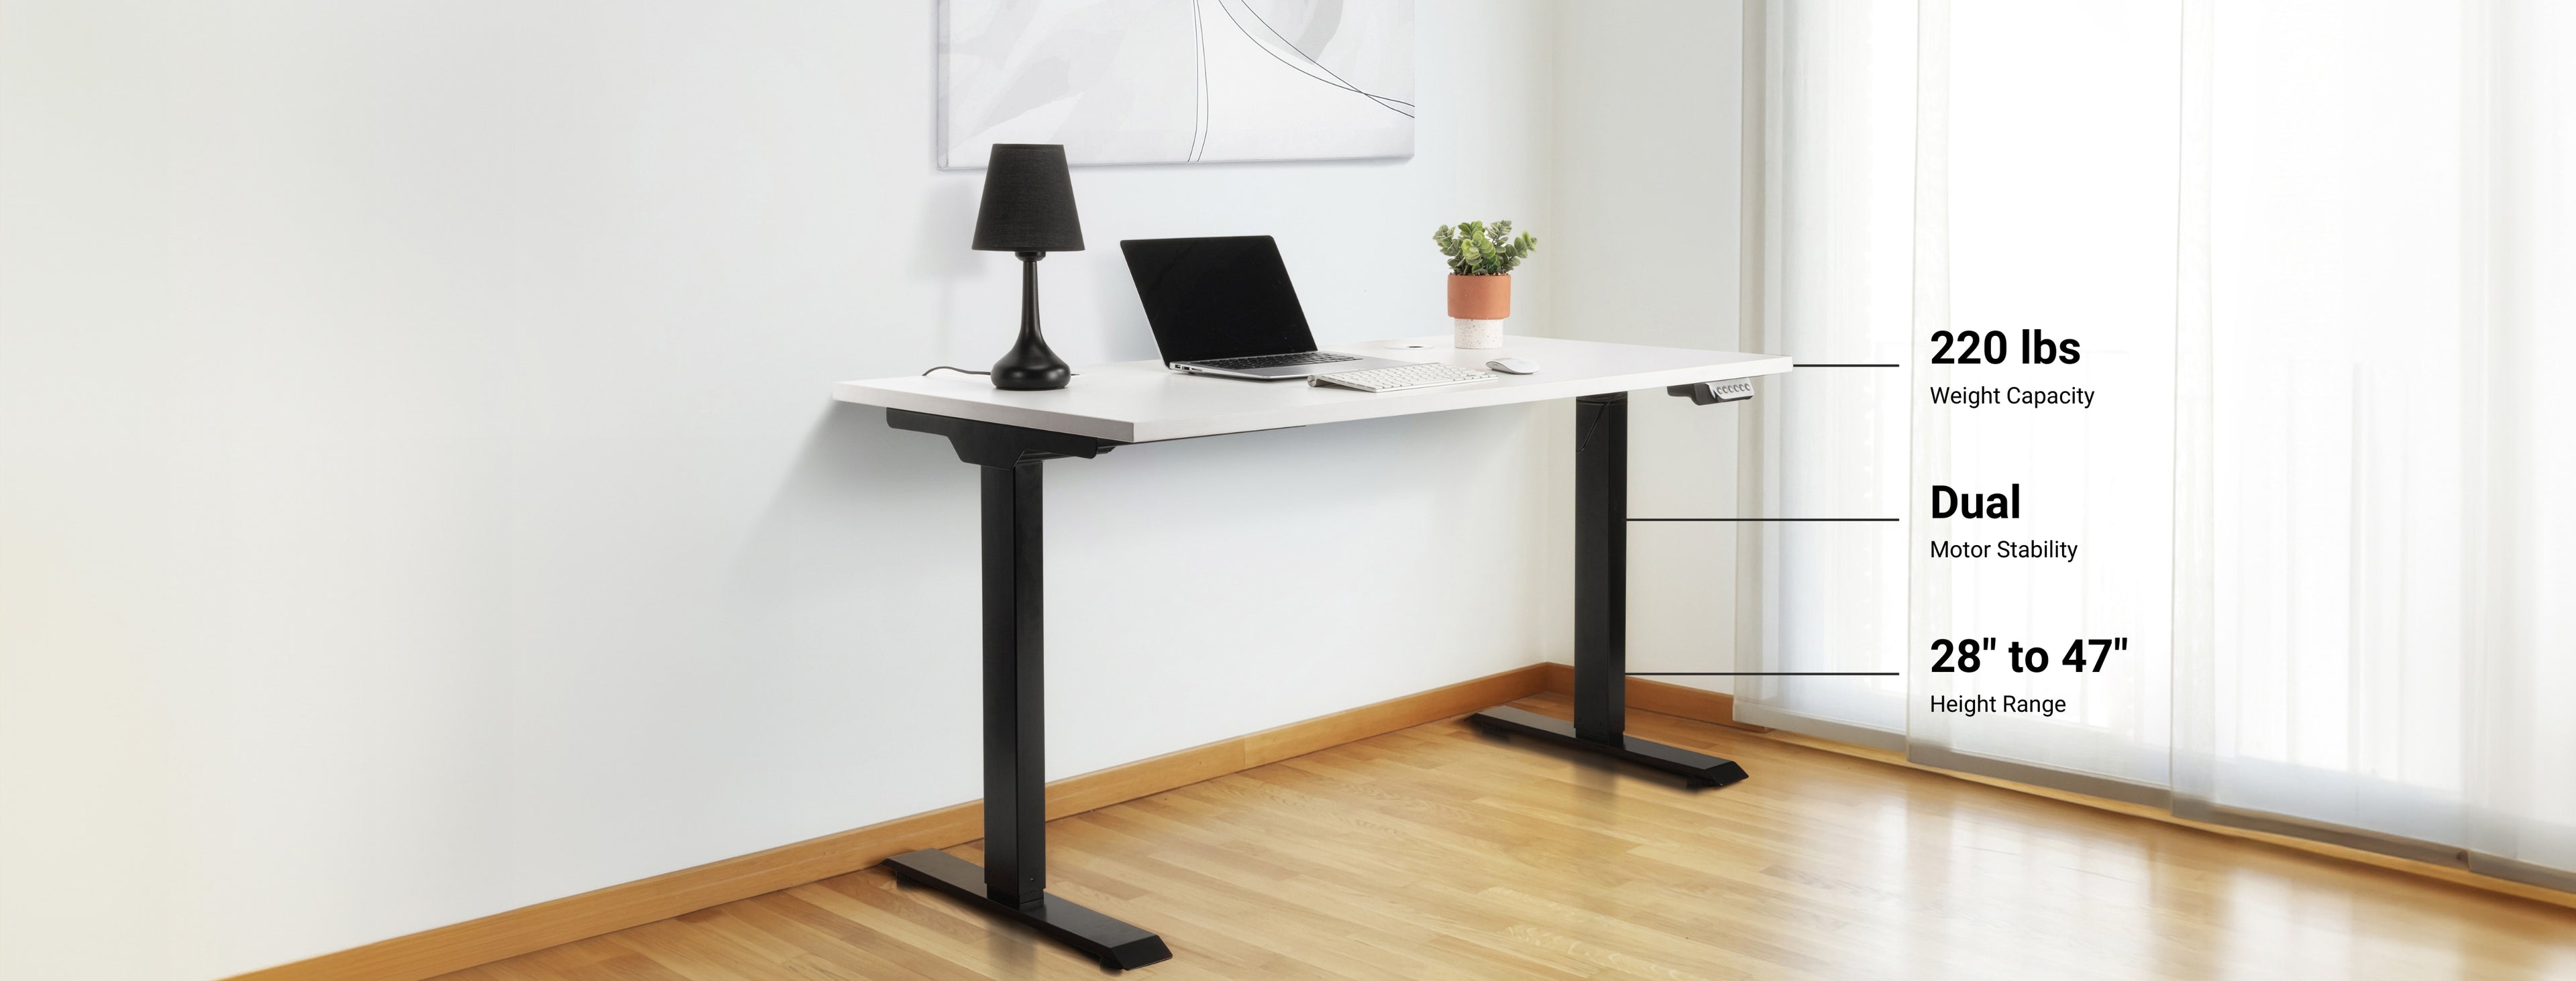 Workspace Interiors - Electric Sit/Stand Desk